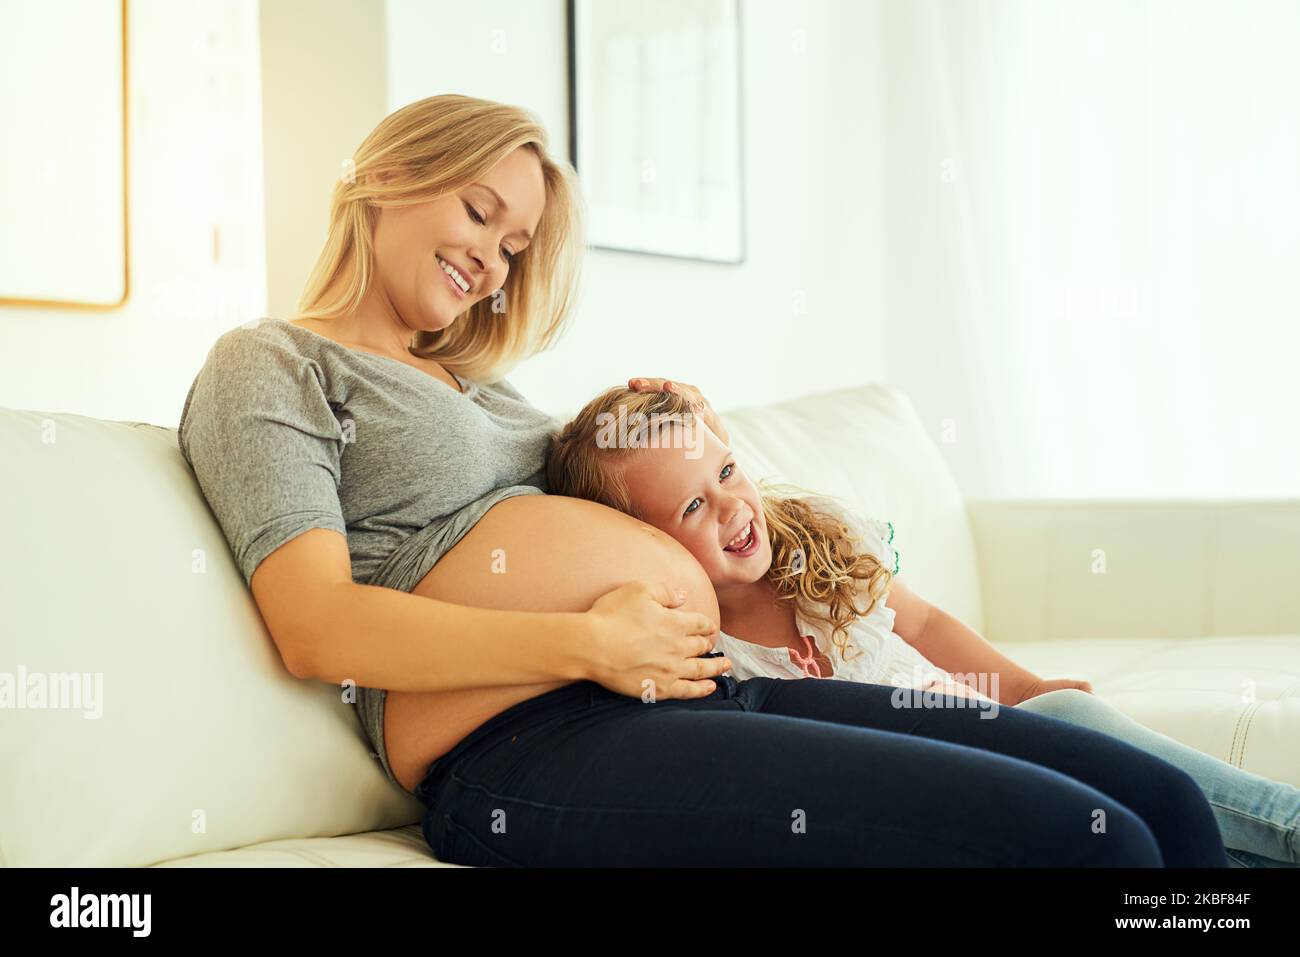 Bonding with her baby brother. a little girl listening to her mothers pregnant belly. Stock Photo